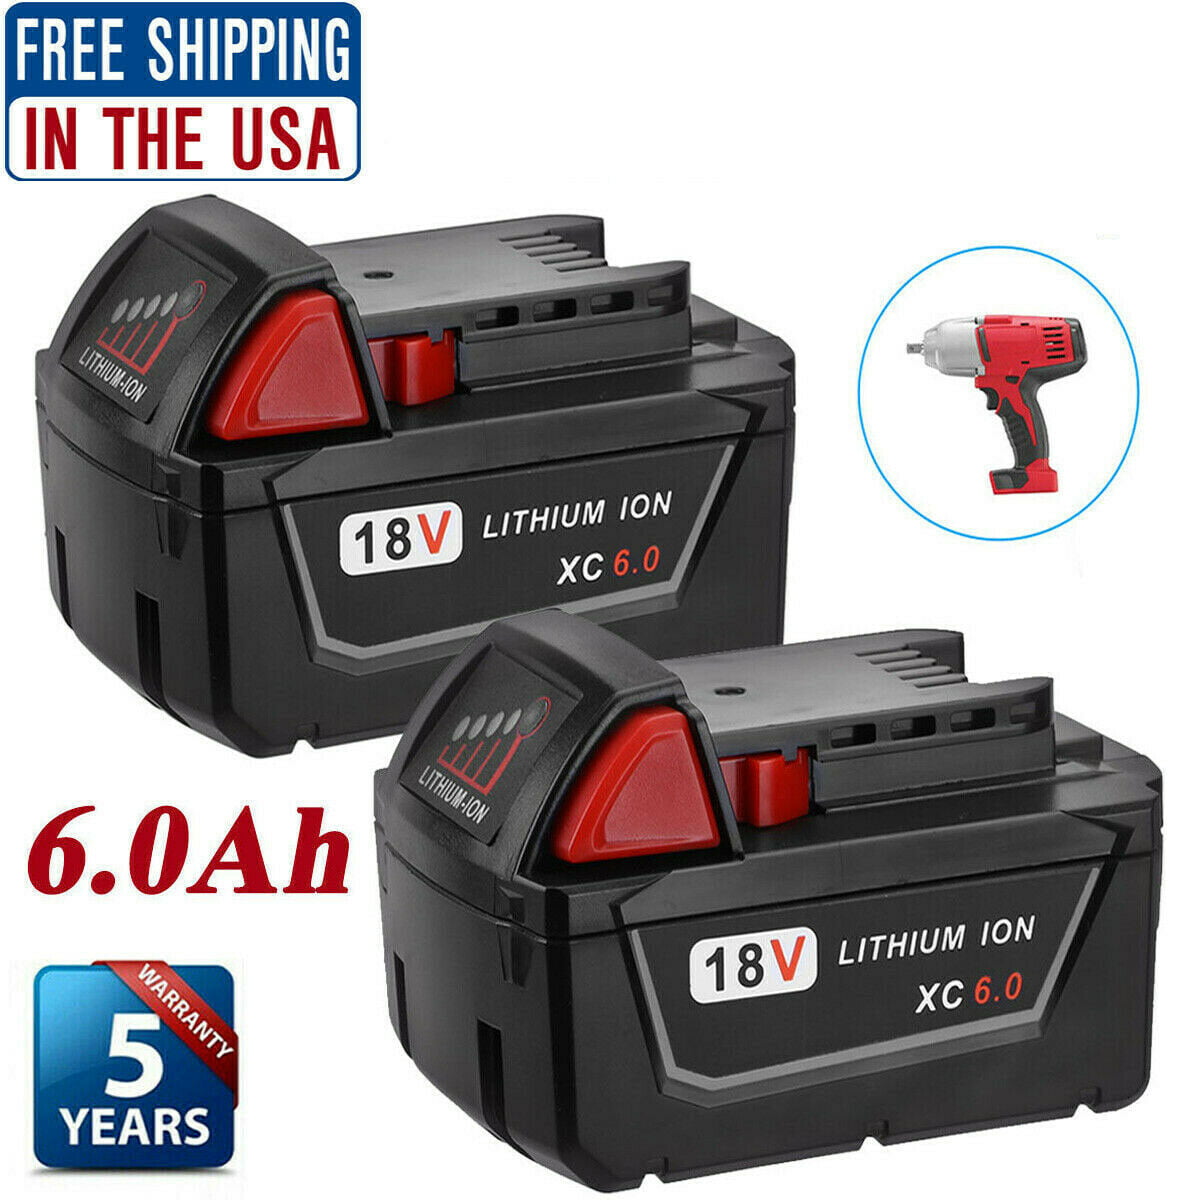 2 PACK For Milwaukee M18 Lithium XC 6.0 AH Extended Capacity Battery 48-11-1860 